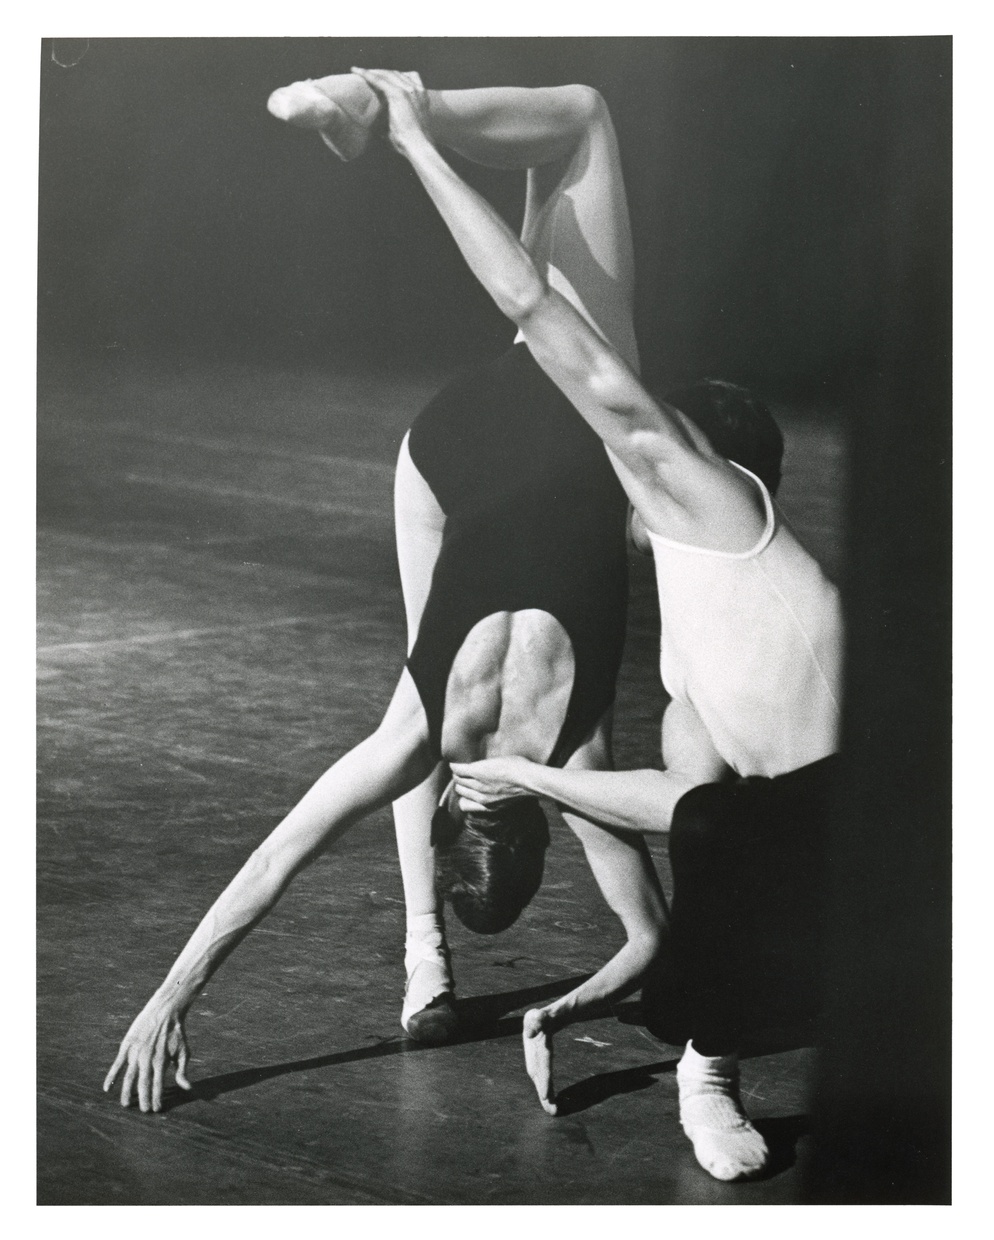 A black and white photograph of two ballet dancers, one balanced on one foot with body upside down and back to the camera, the other provides support at the head and raised foot.